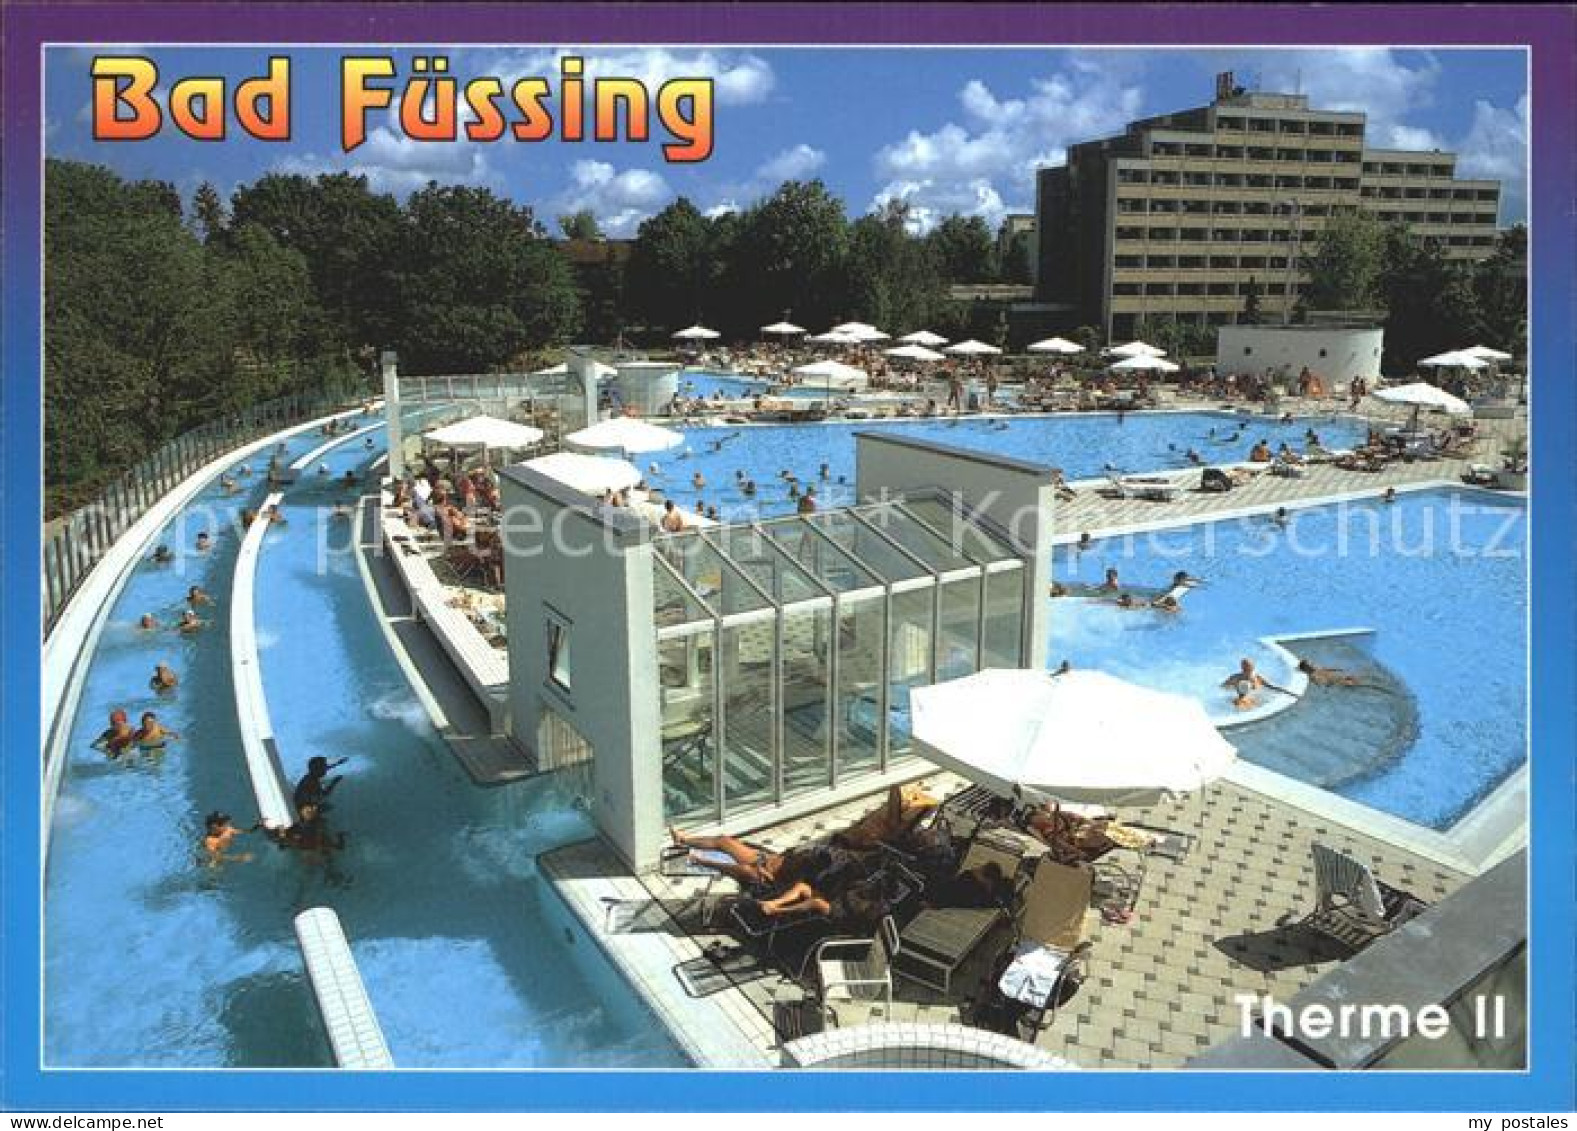 72369489 Fuessing Bad Therme II Thermal Mineral Heilquelle Bad Fuessing - Bad Fuessing